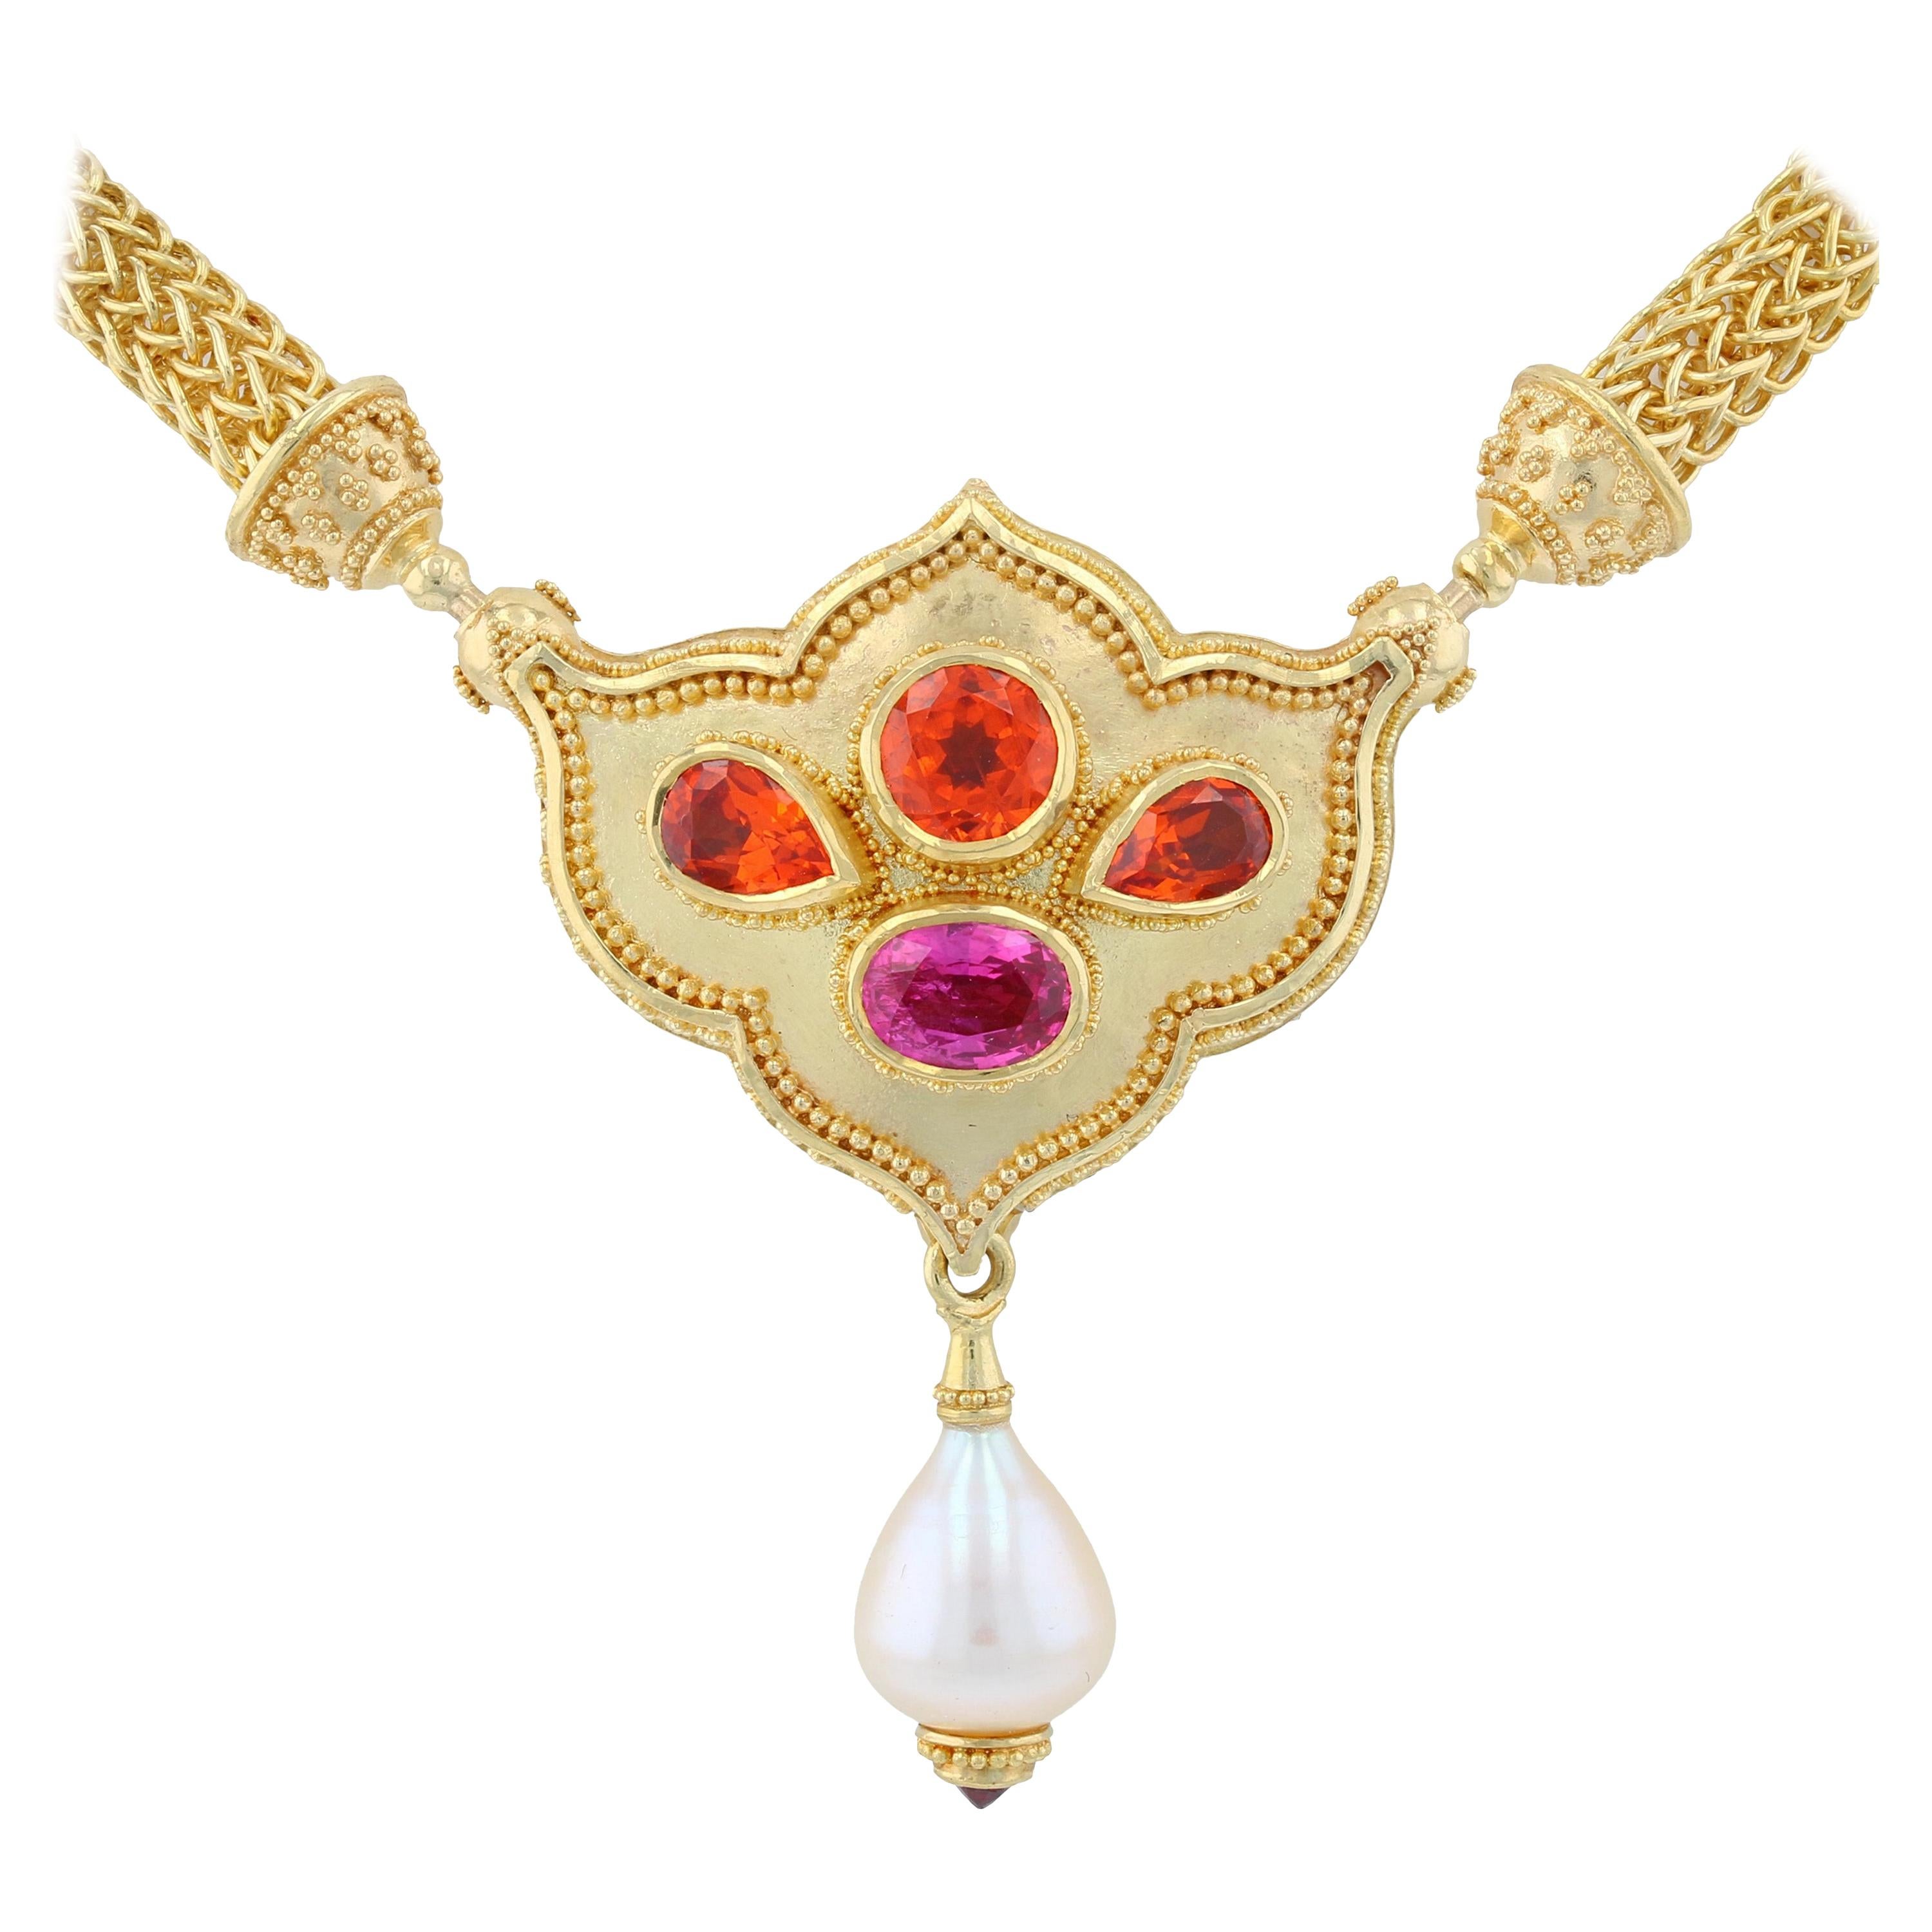 Kent Raible's Flower Jewel 18K Pendant Necklace with Mandarin Garnets and Spinel